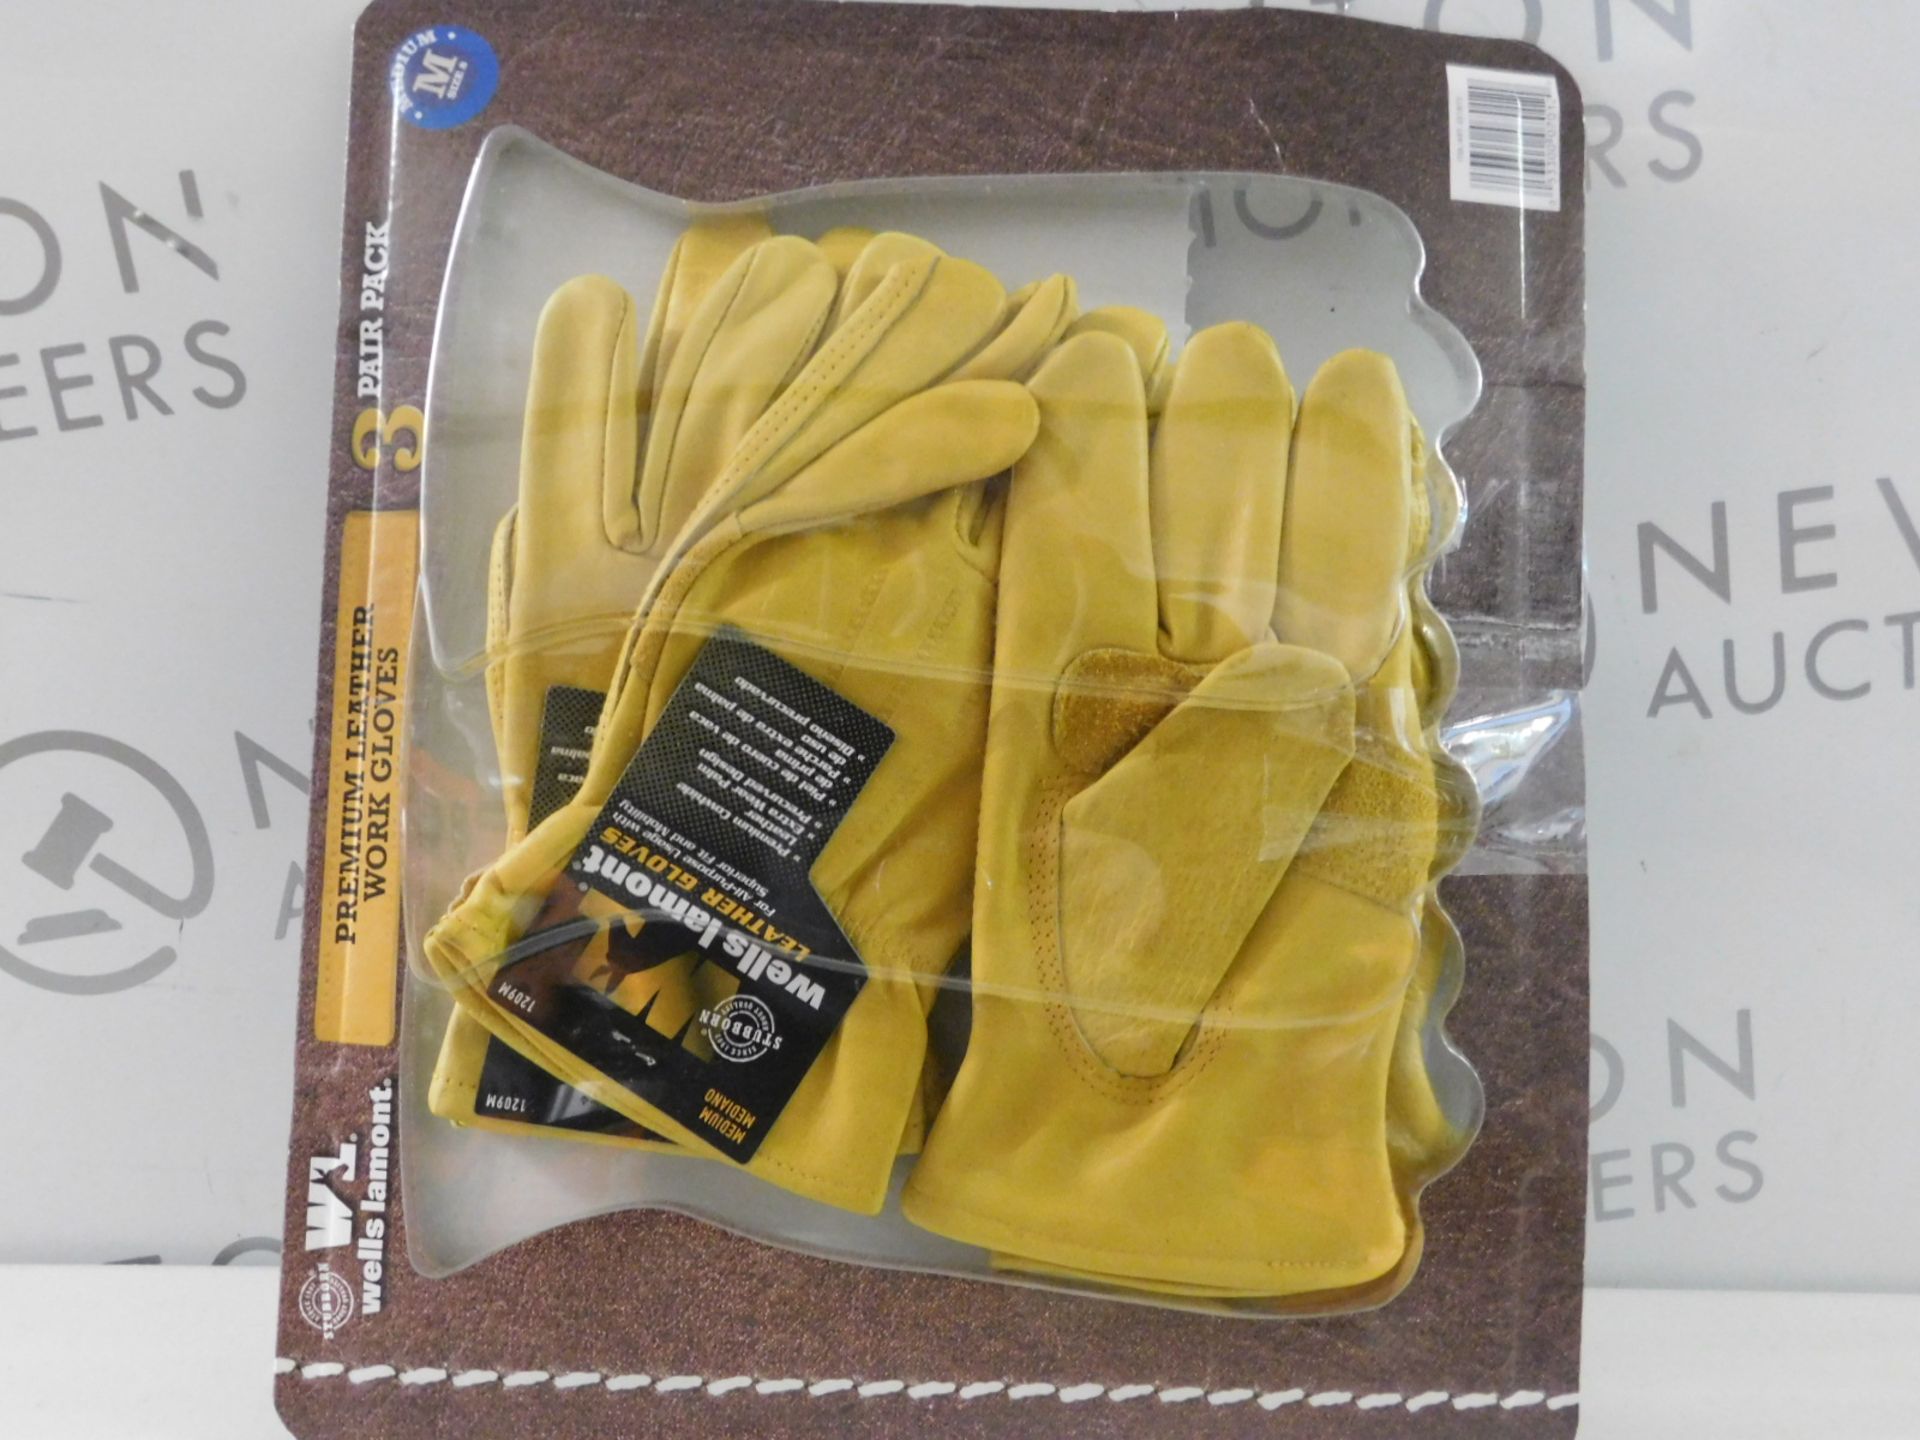 1 PACK OF 3 PAIRS OF WELLS LAMONT PREMIUM WORK GLOVES SIZE M RRP £44.99